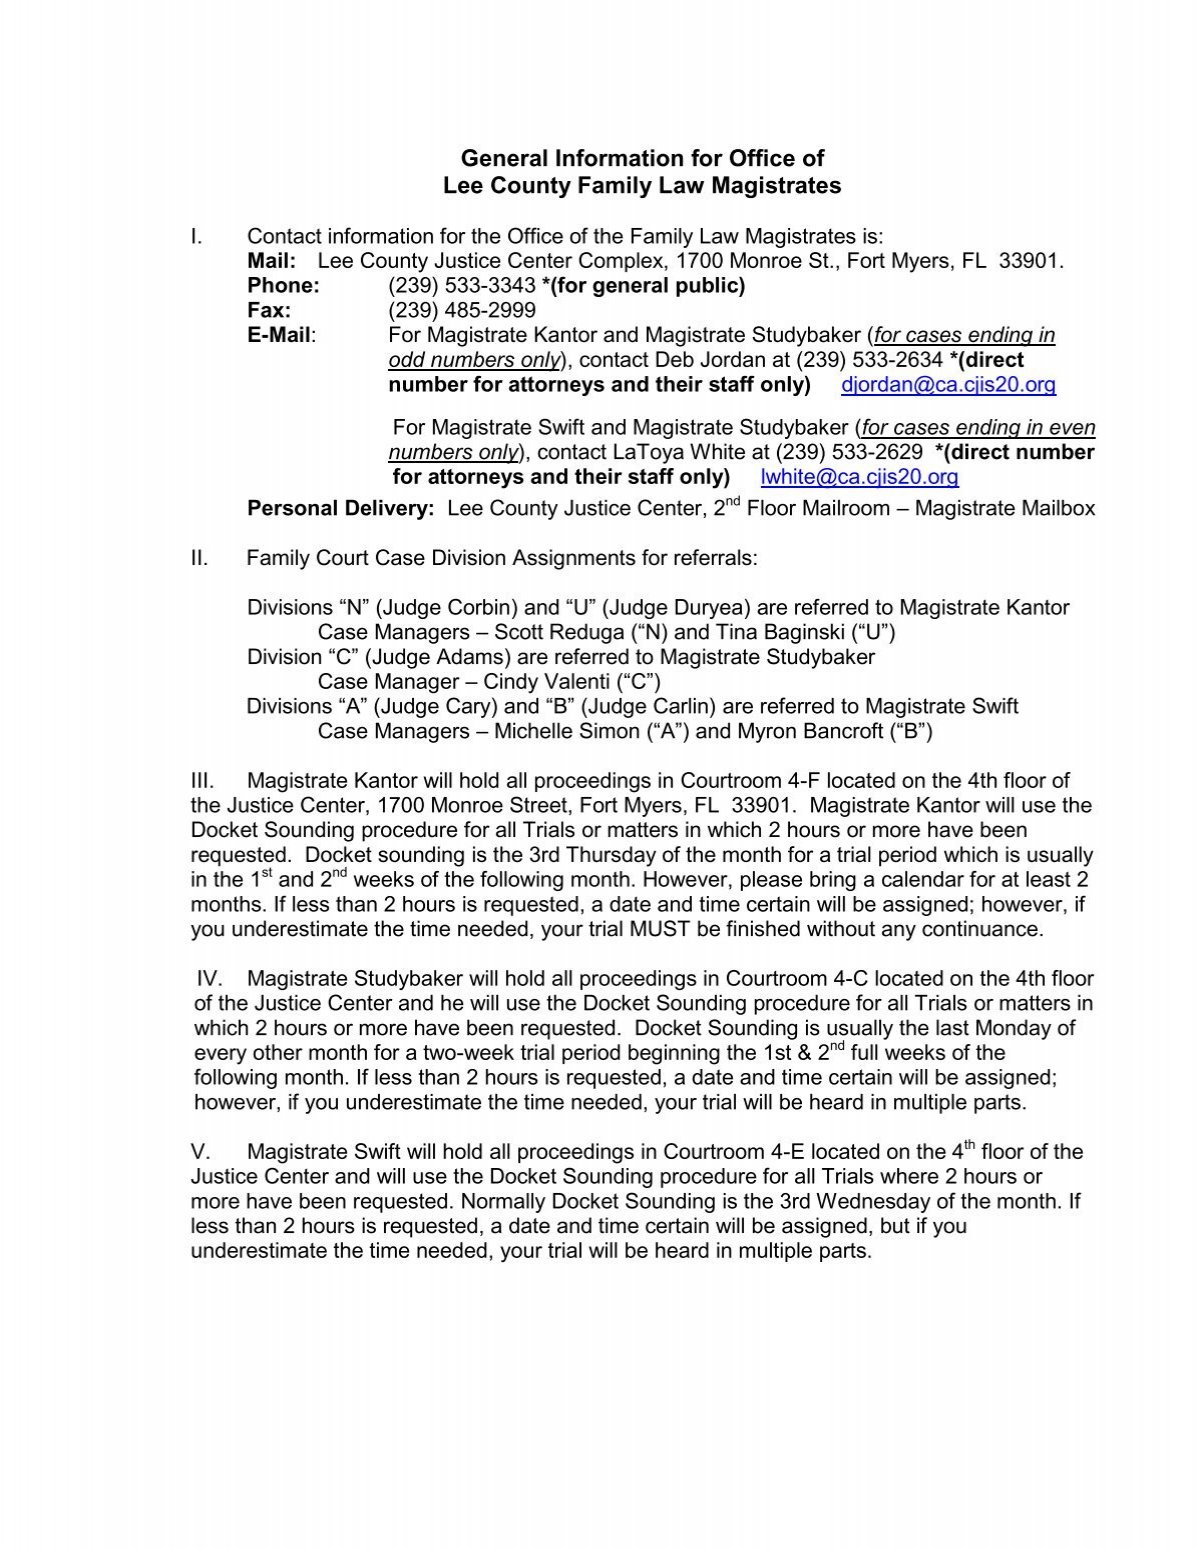 General Information for Office of Lee County Family Law Cjis20 org